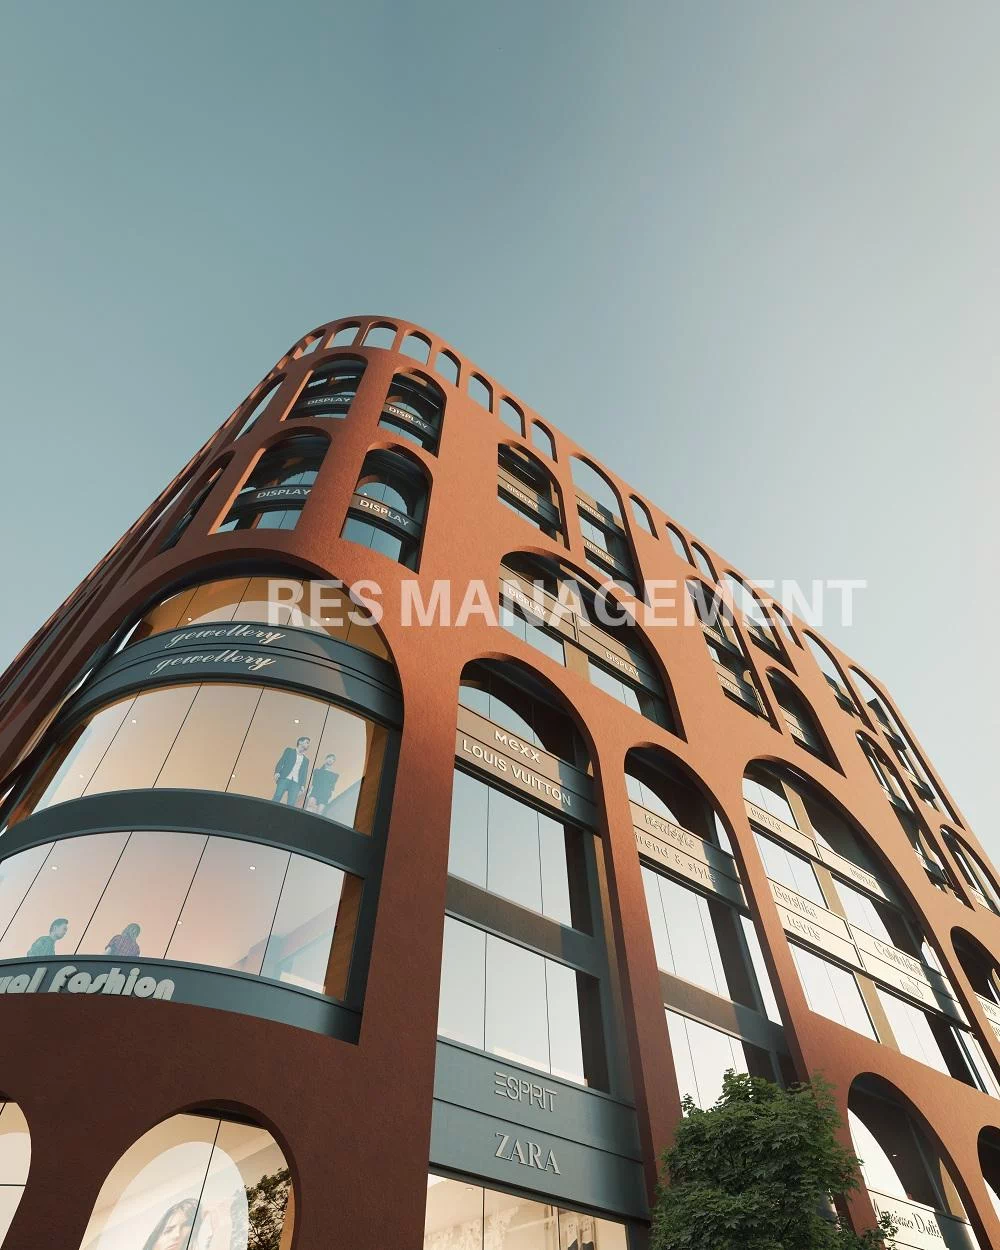 Pre-Leased Office Space, Ahmedabad 